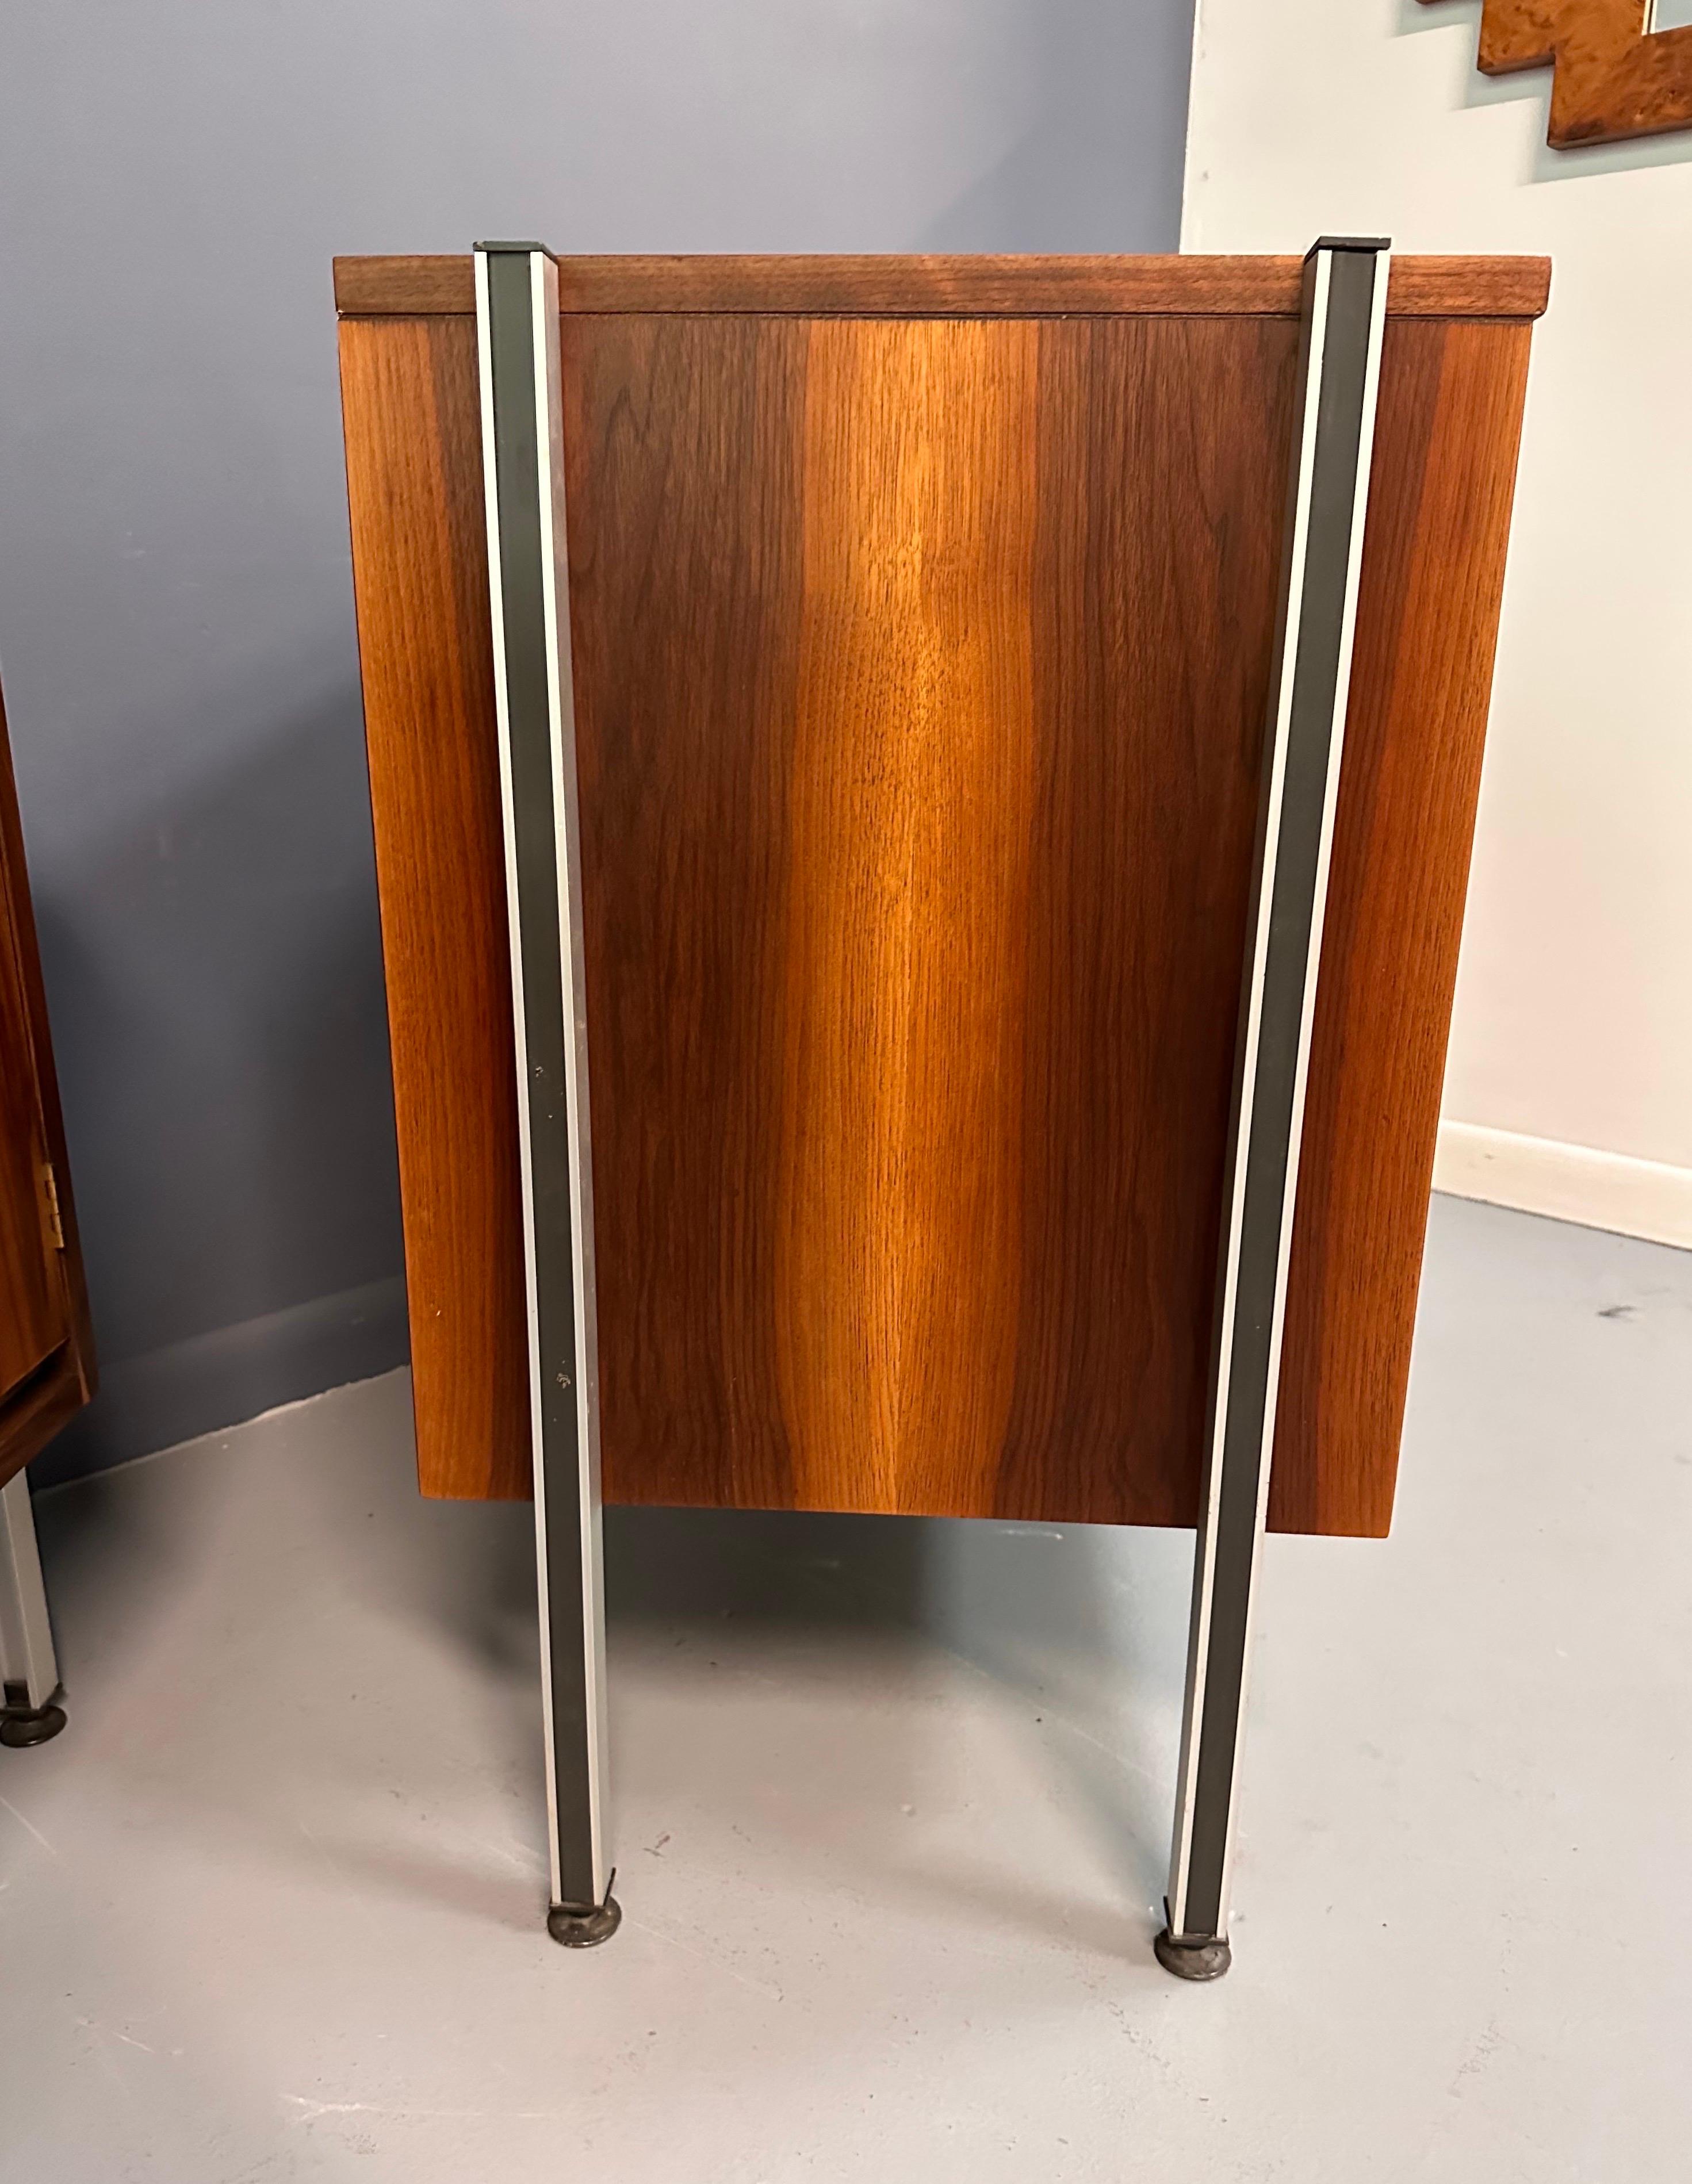 20th Century Pair of Midcentury Walnut Cabinets with Exposed Aluminum Legs Style of Wormley